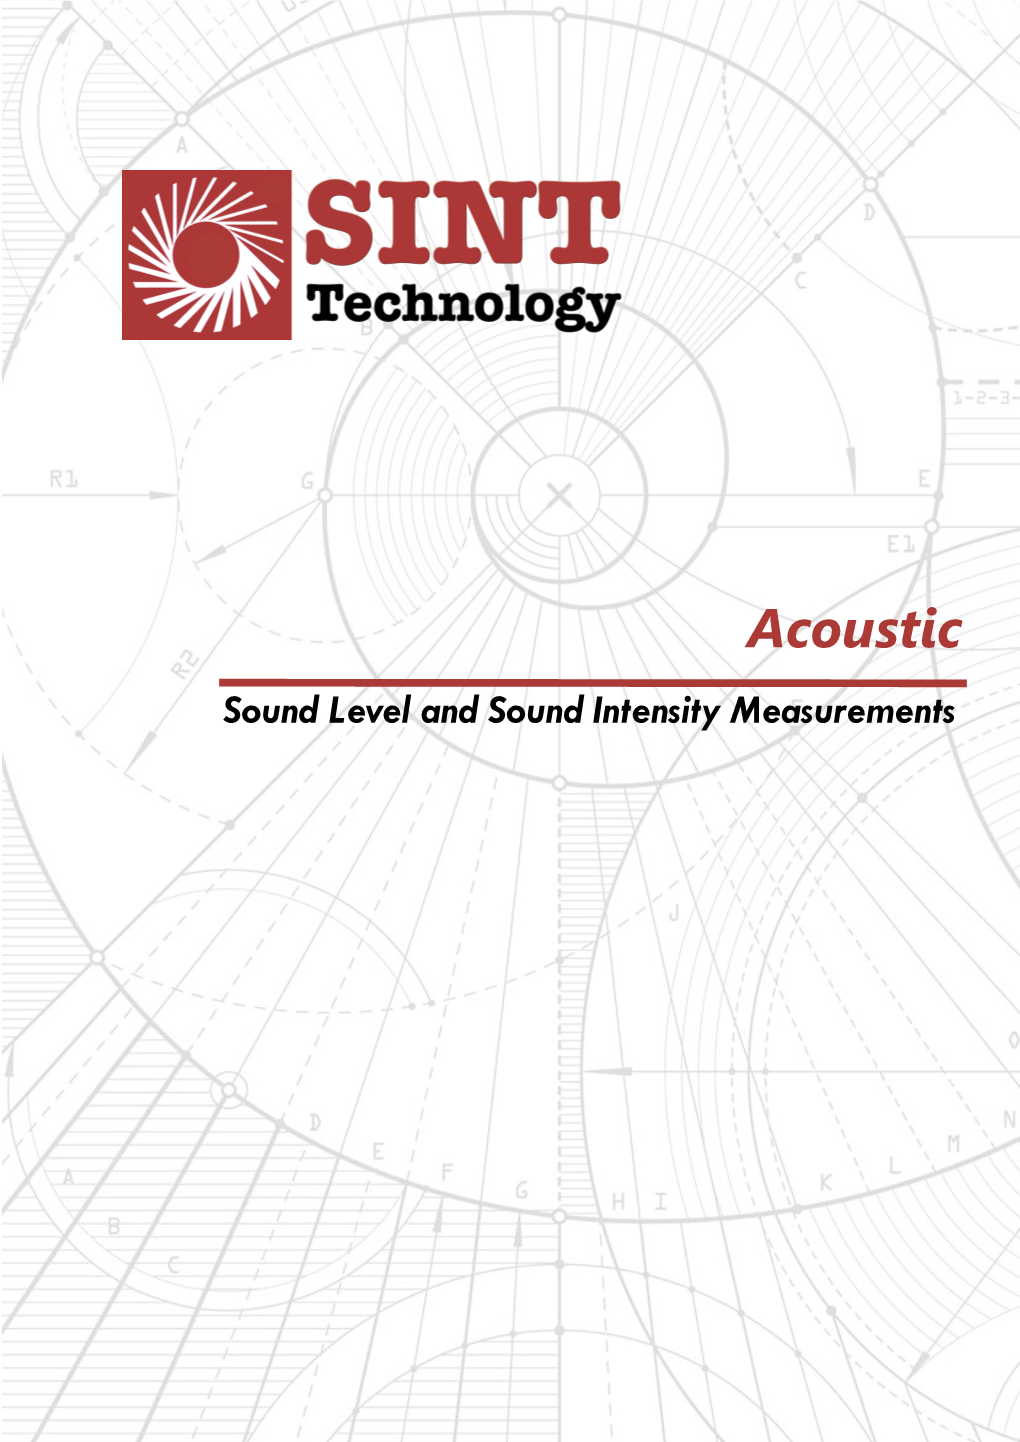 Acoustic Sound Level and Sound Intensity Measurements